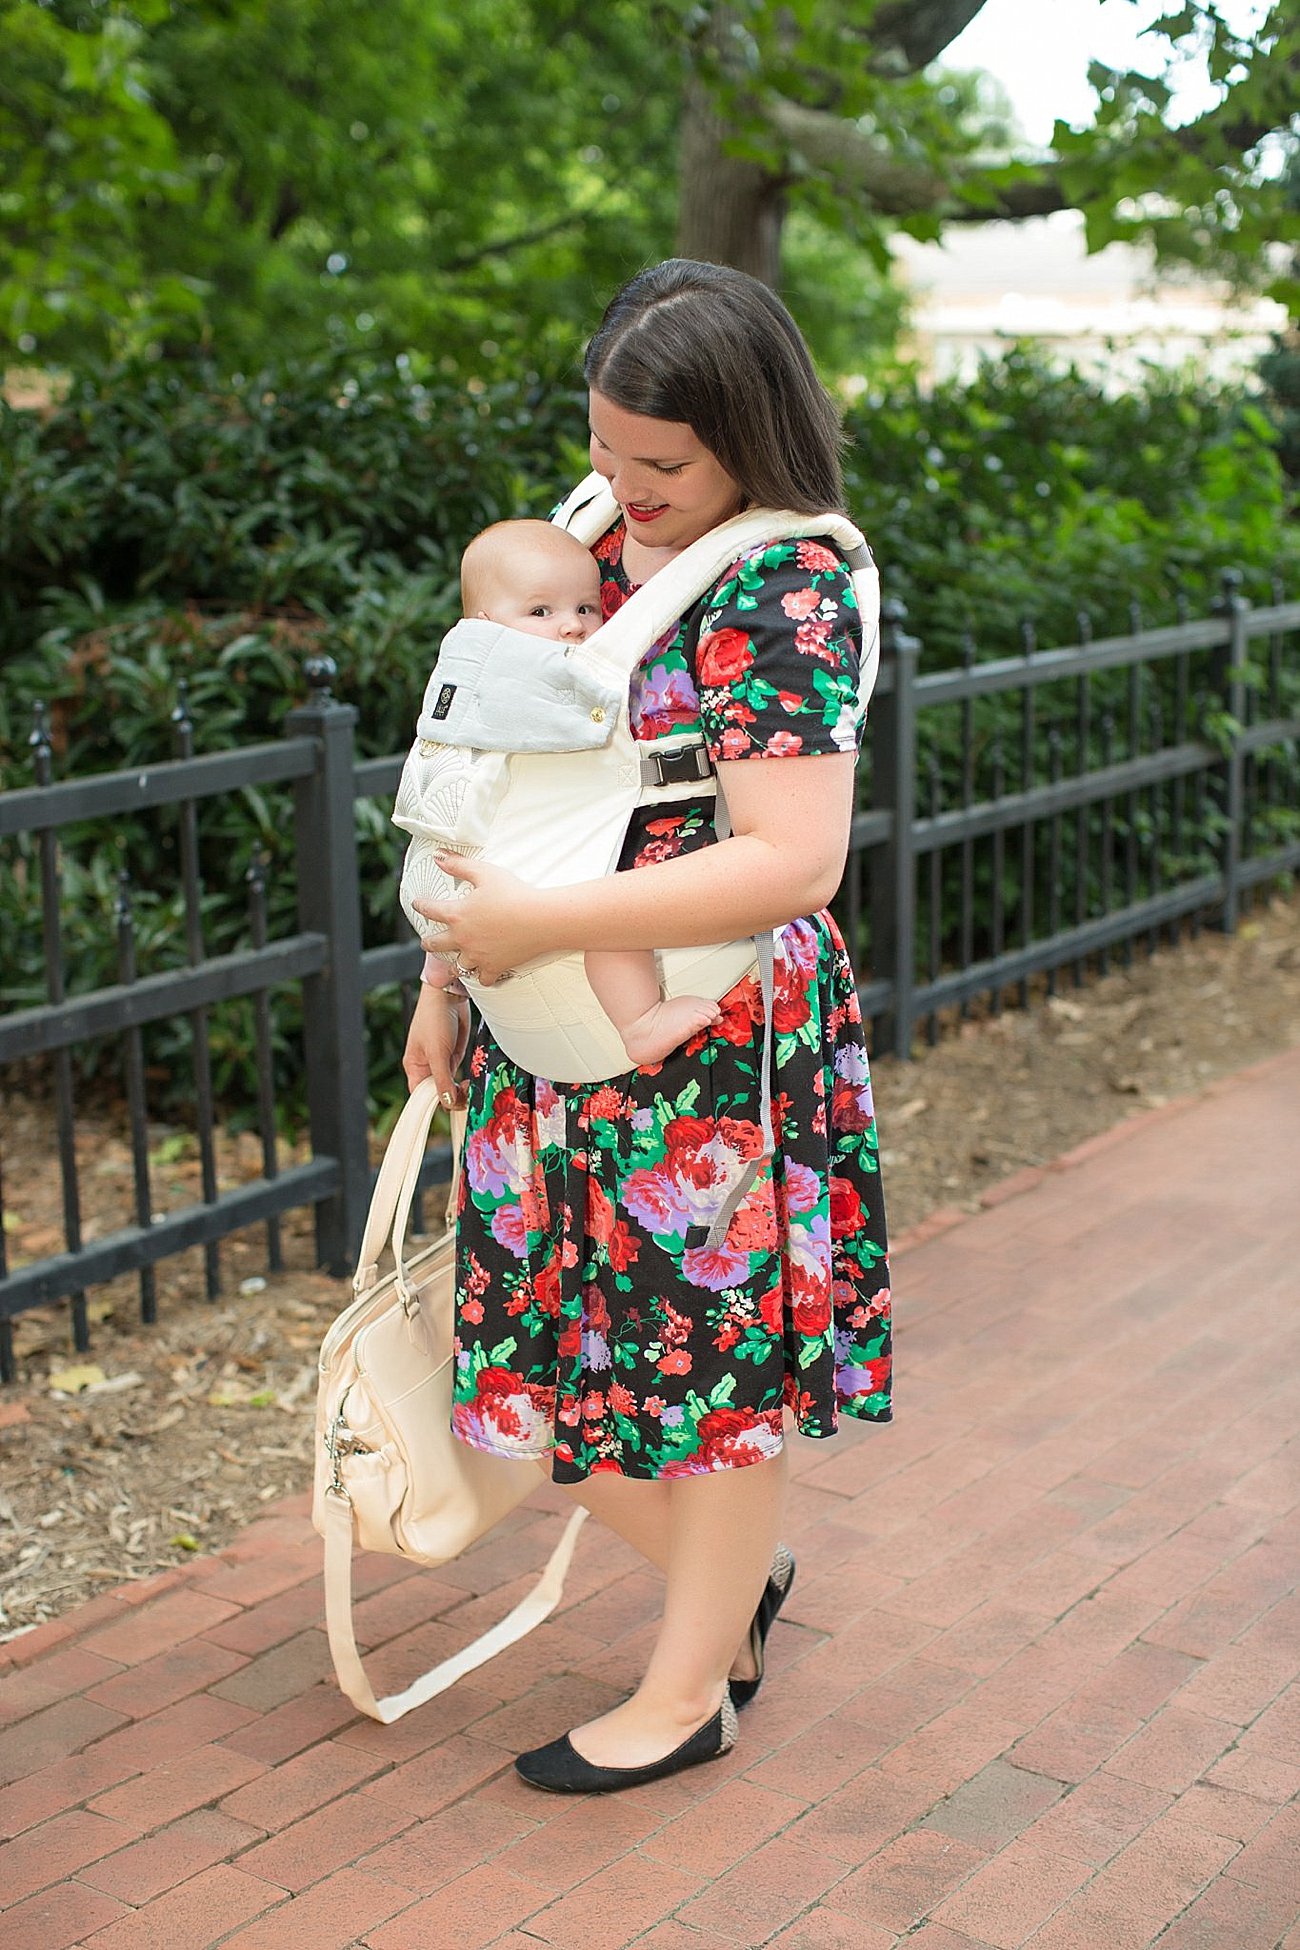 LulaRoe floral Amelia dress, Lillebaby Complete Embossed Luxe carrier in Brilliance, The Root Collective shoes, Kalencom "Berlin" Diaper Bag | North Carolina Fashion Blogger (4)